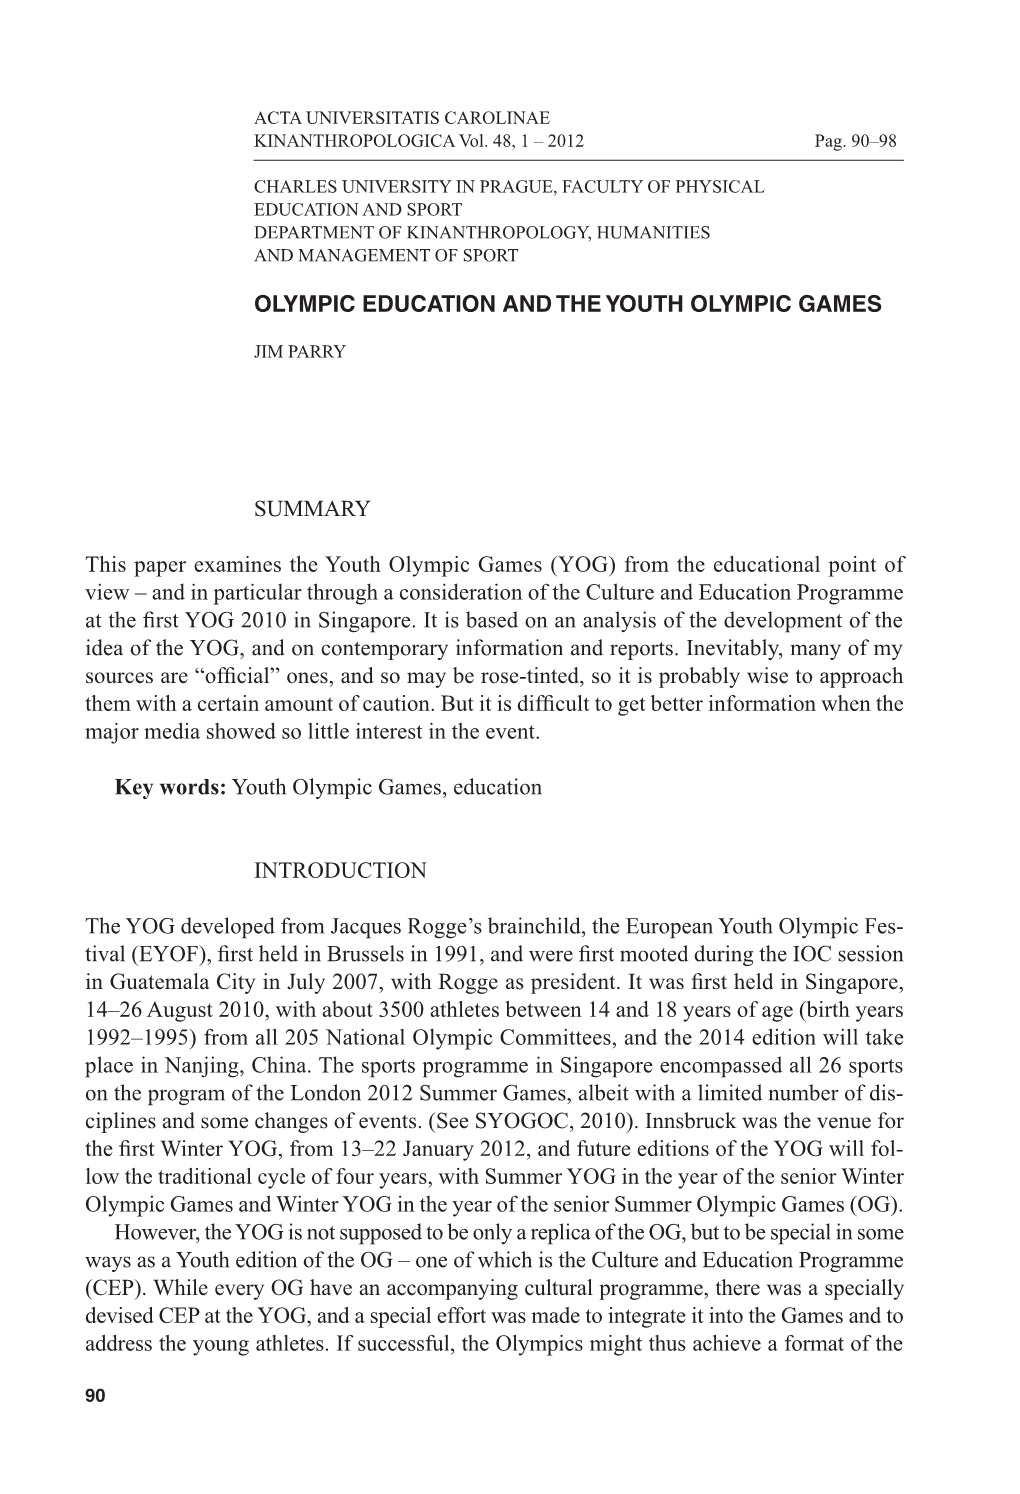 SUMMARY This Paper Examines the Youth Olympic Games (YOG) From